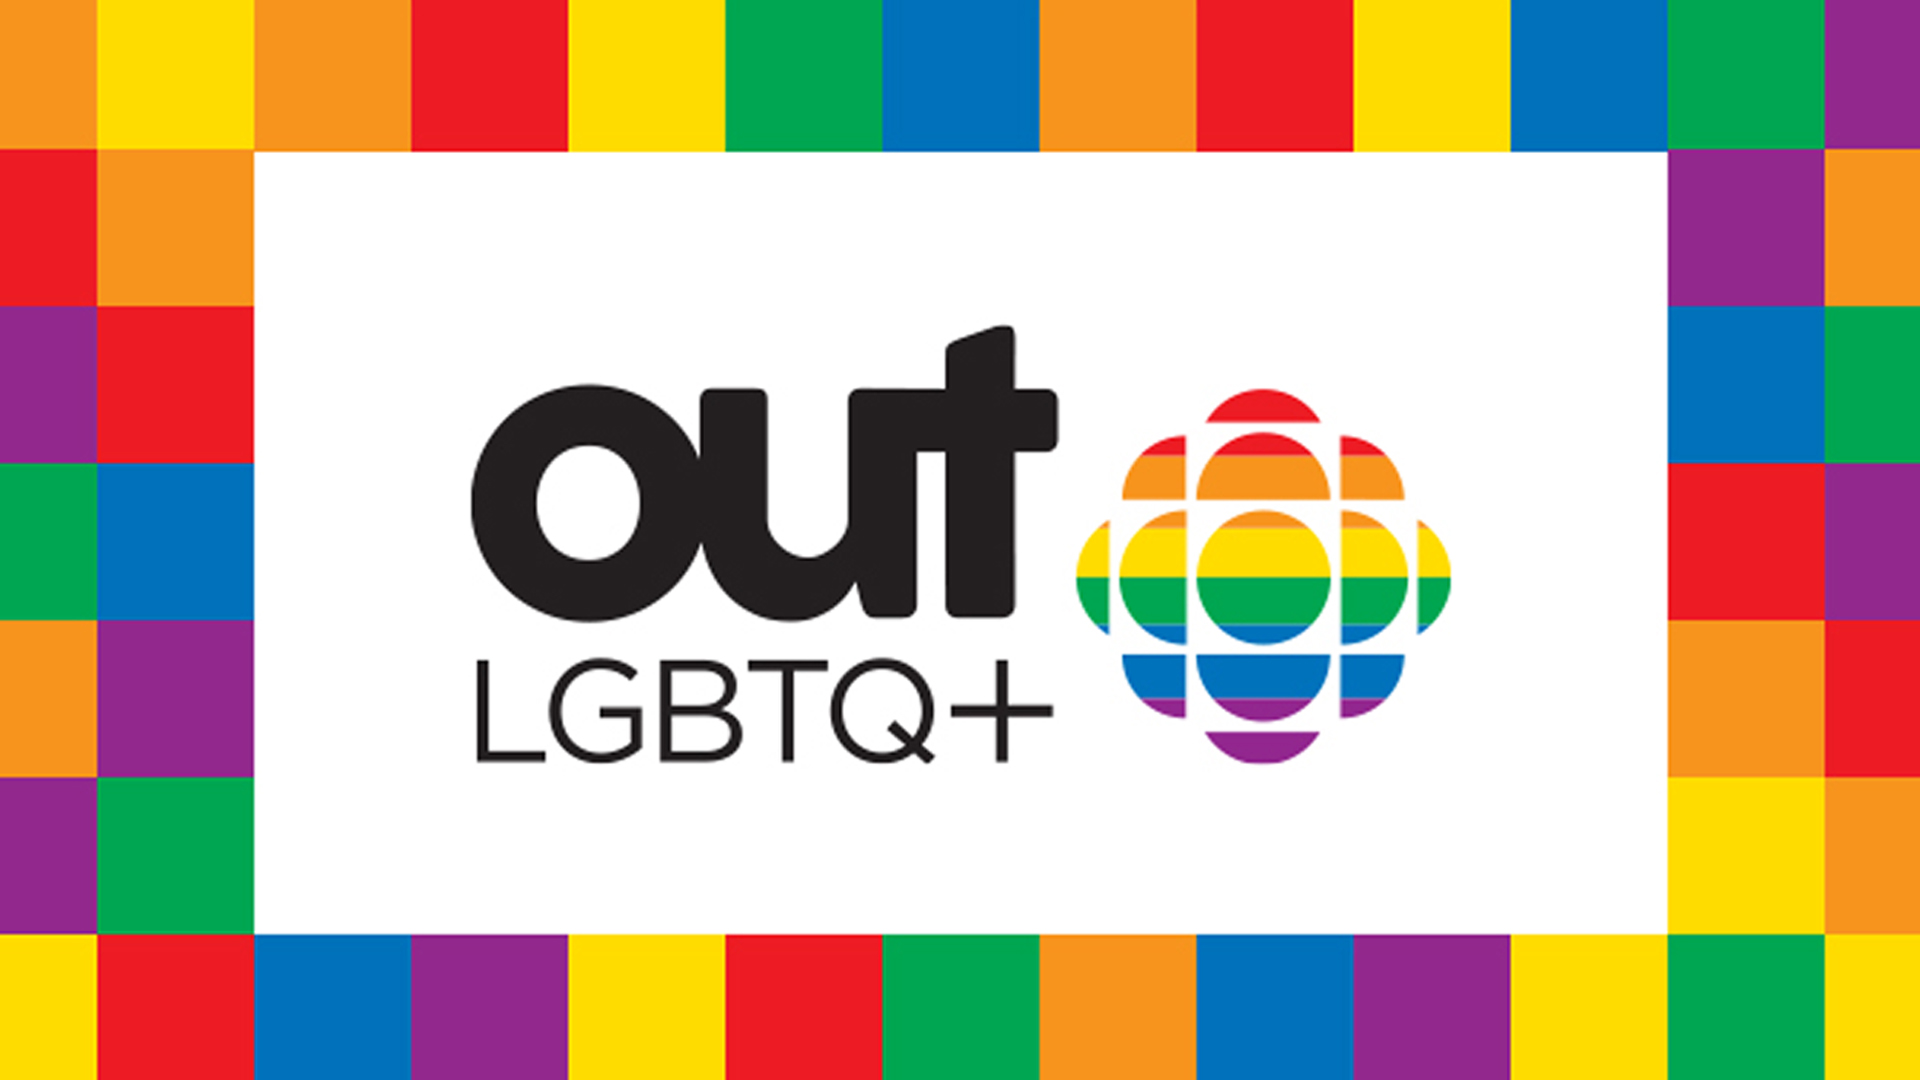 How Canada's state media enforces the LGBT agenda